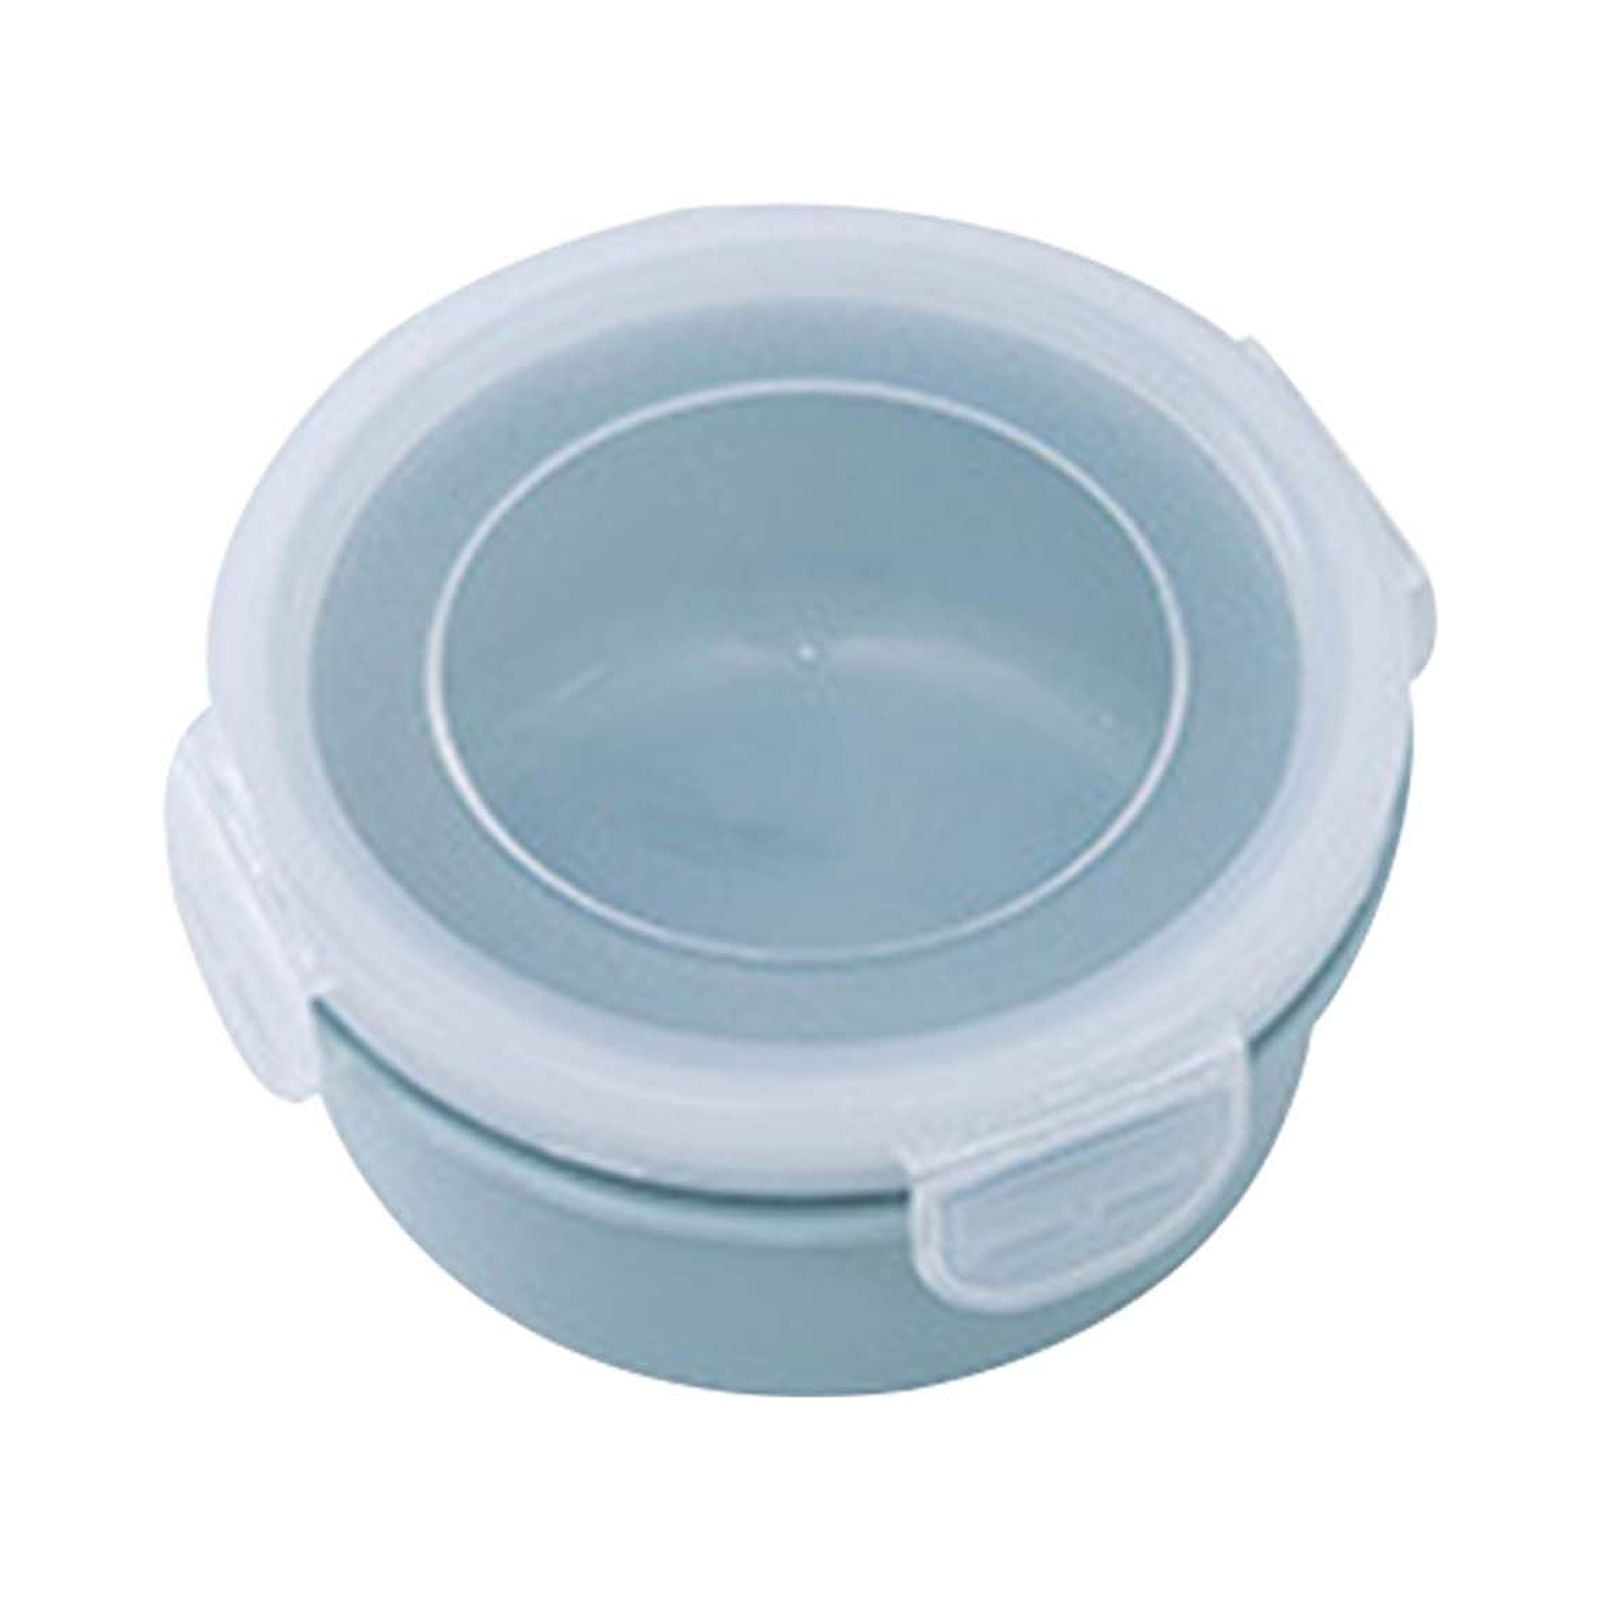  EYNEL 9 oz Small Round Food Storage Containers with